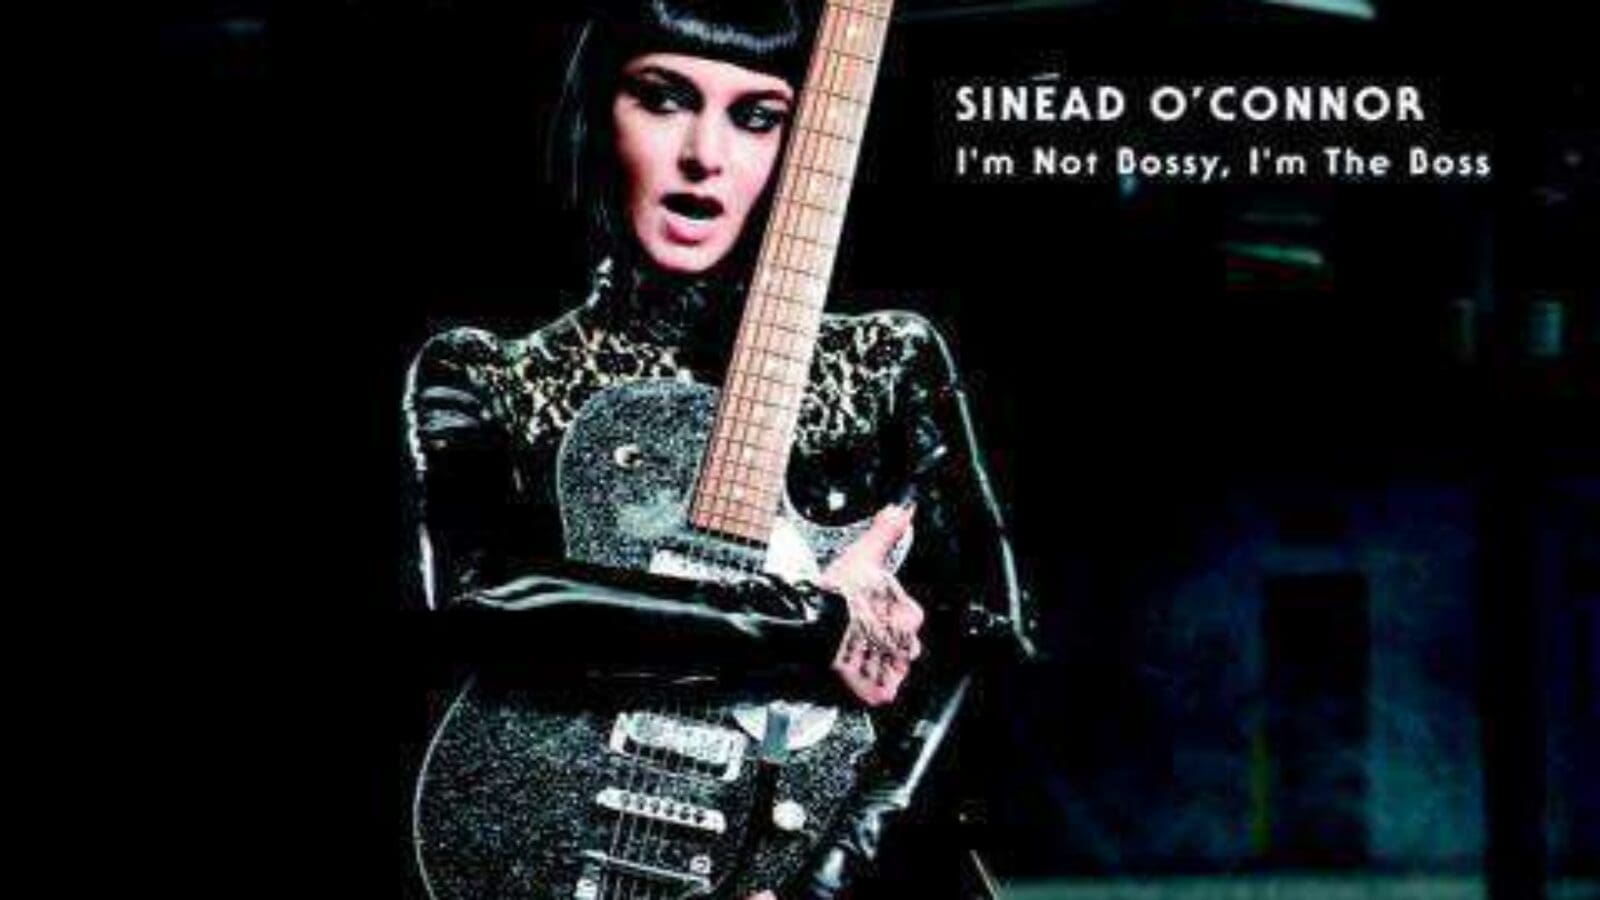 SINEAD O’ CONNOR – I’m Not Bossy, I’m The Boss